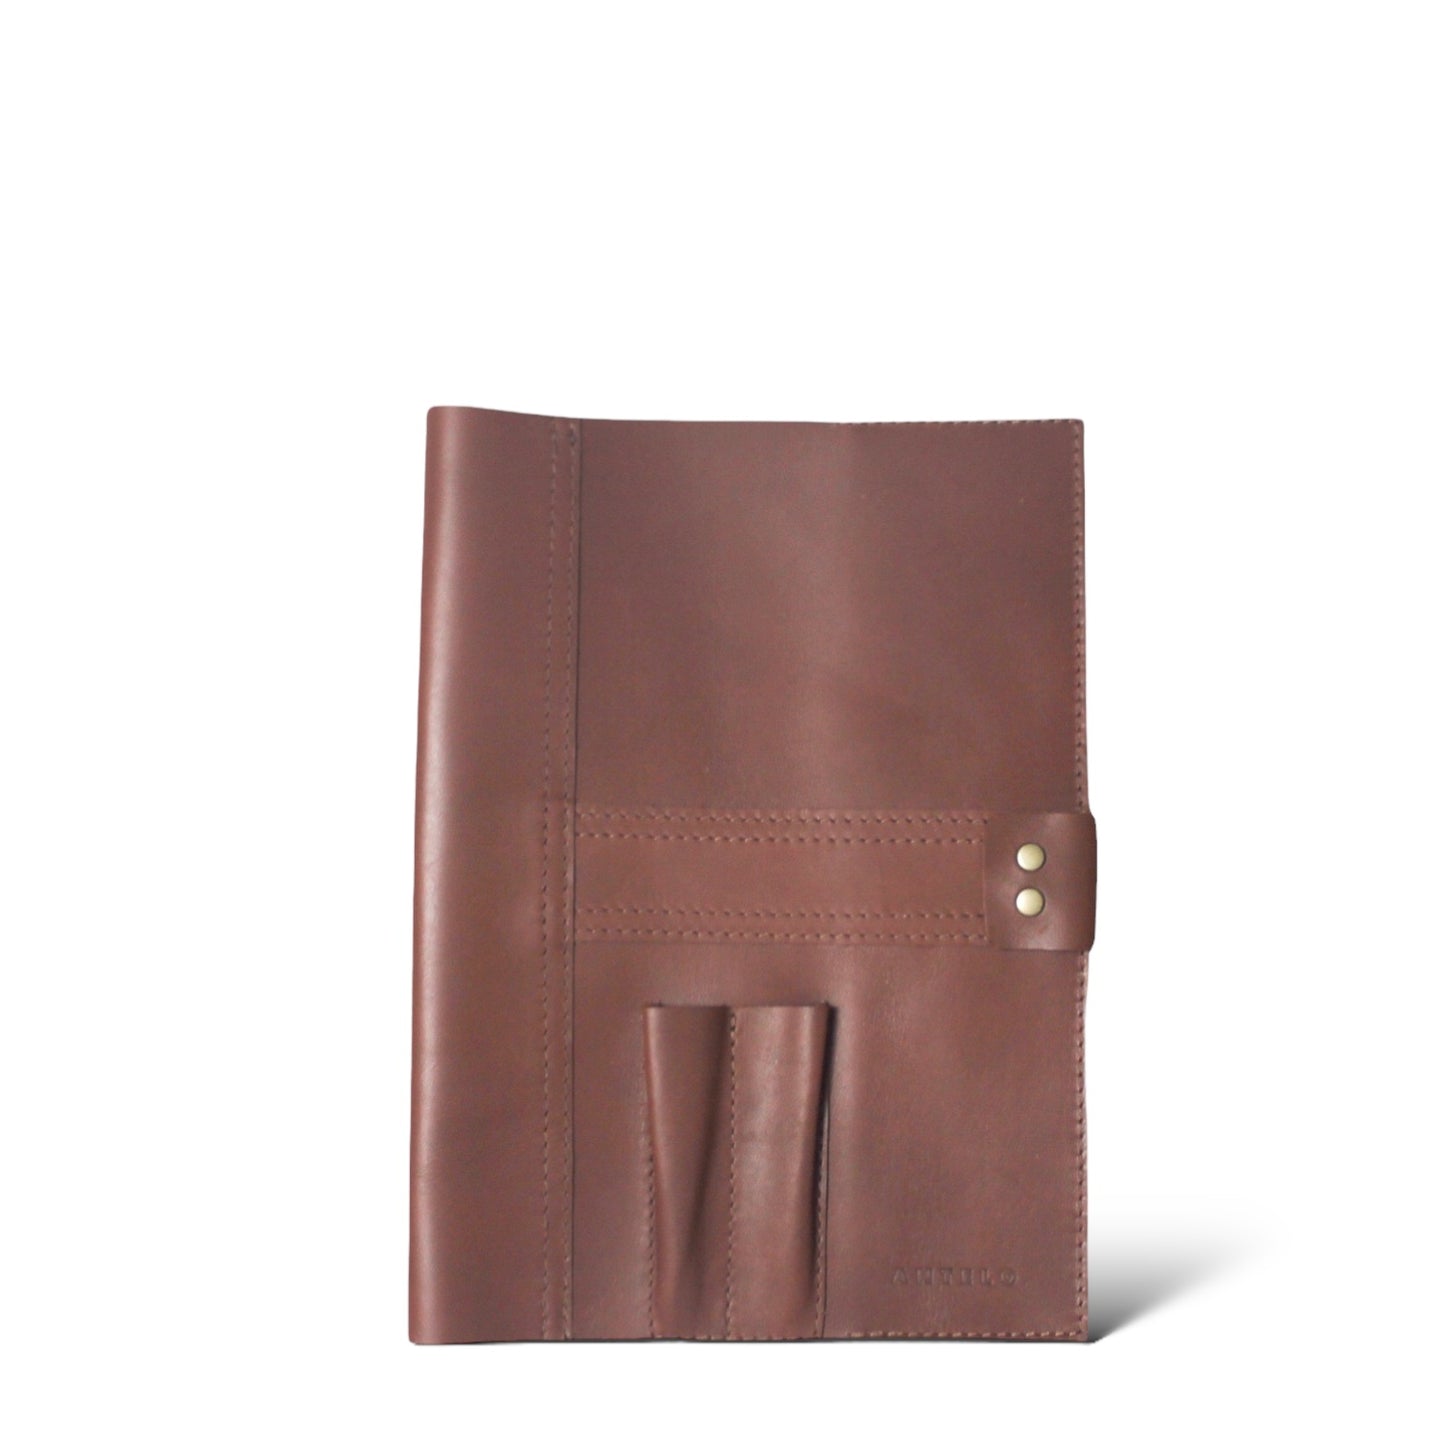 Harry A4 leather notebook cover - End of Range